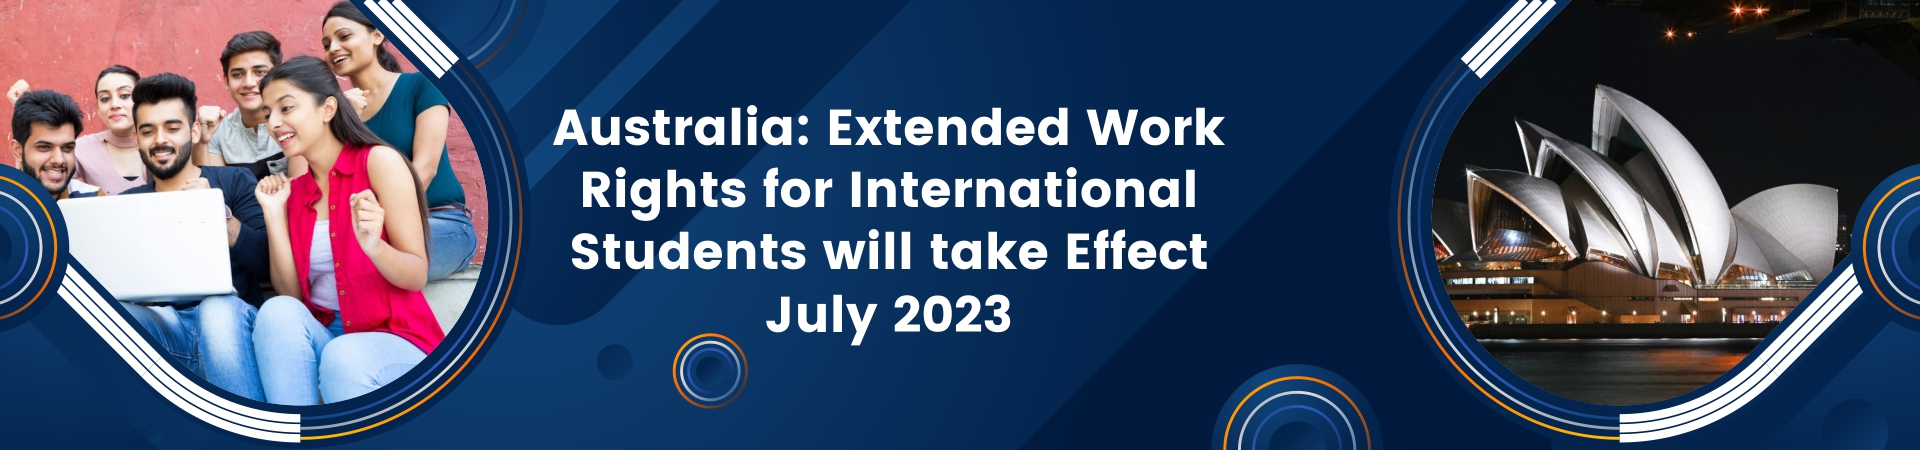 Australia: extended work rights for international students will take effect July 2023